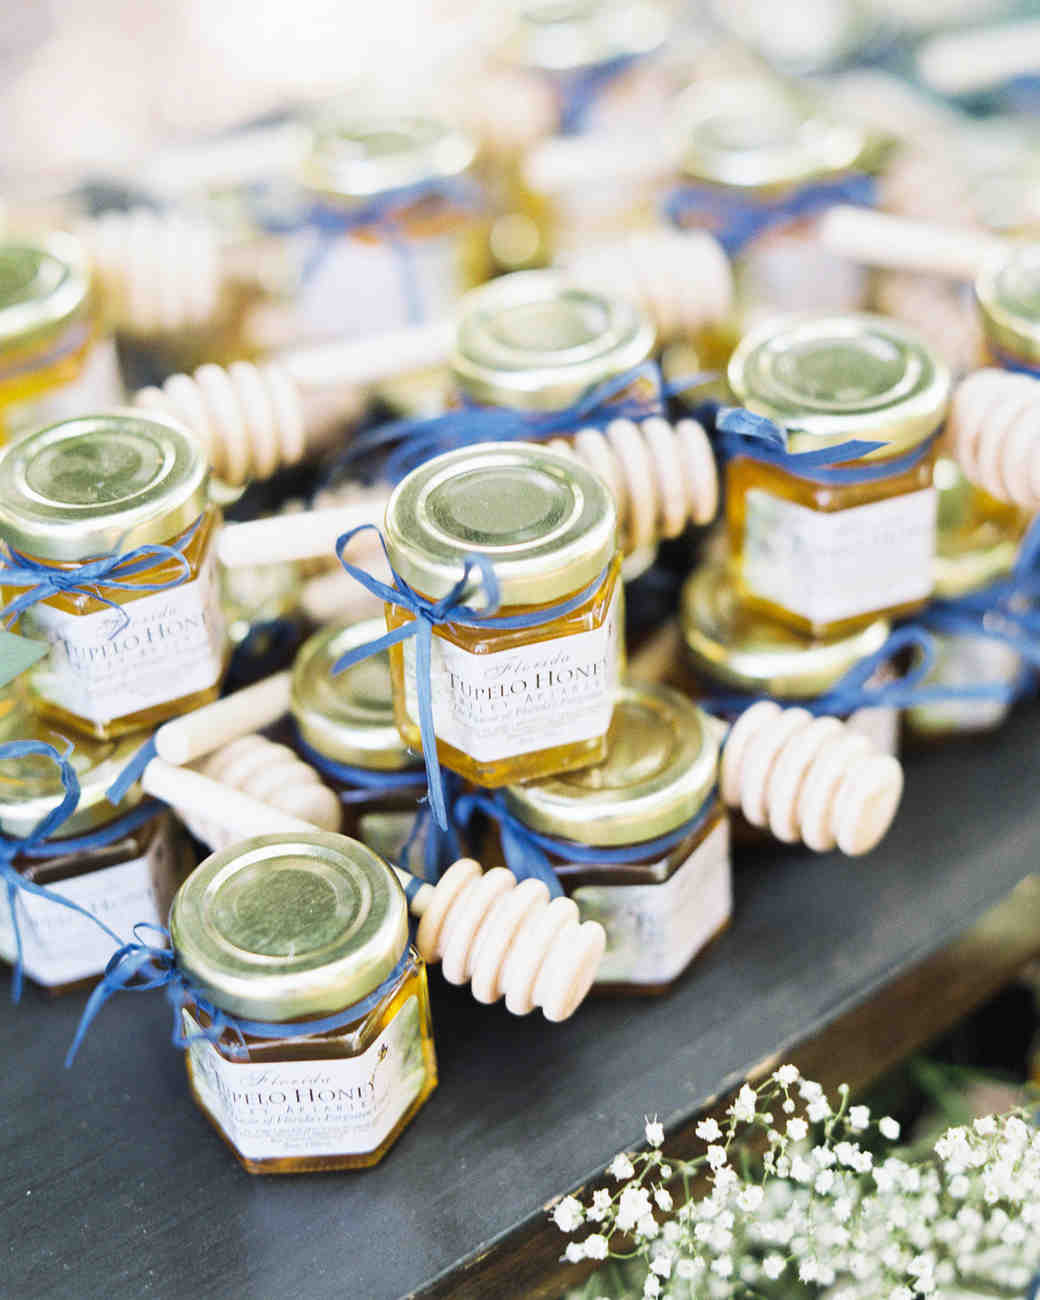 Edible Wedding Favors
 37 Edible Wedding Favors Guests Will Eat Up Literally